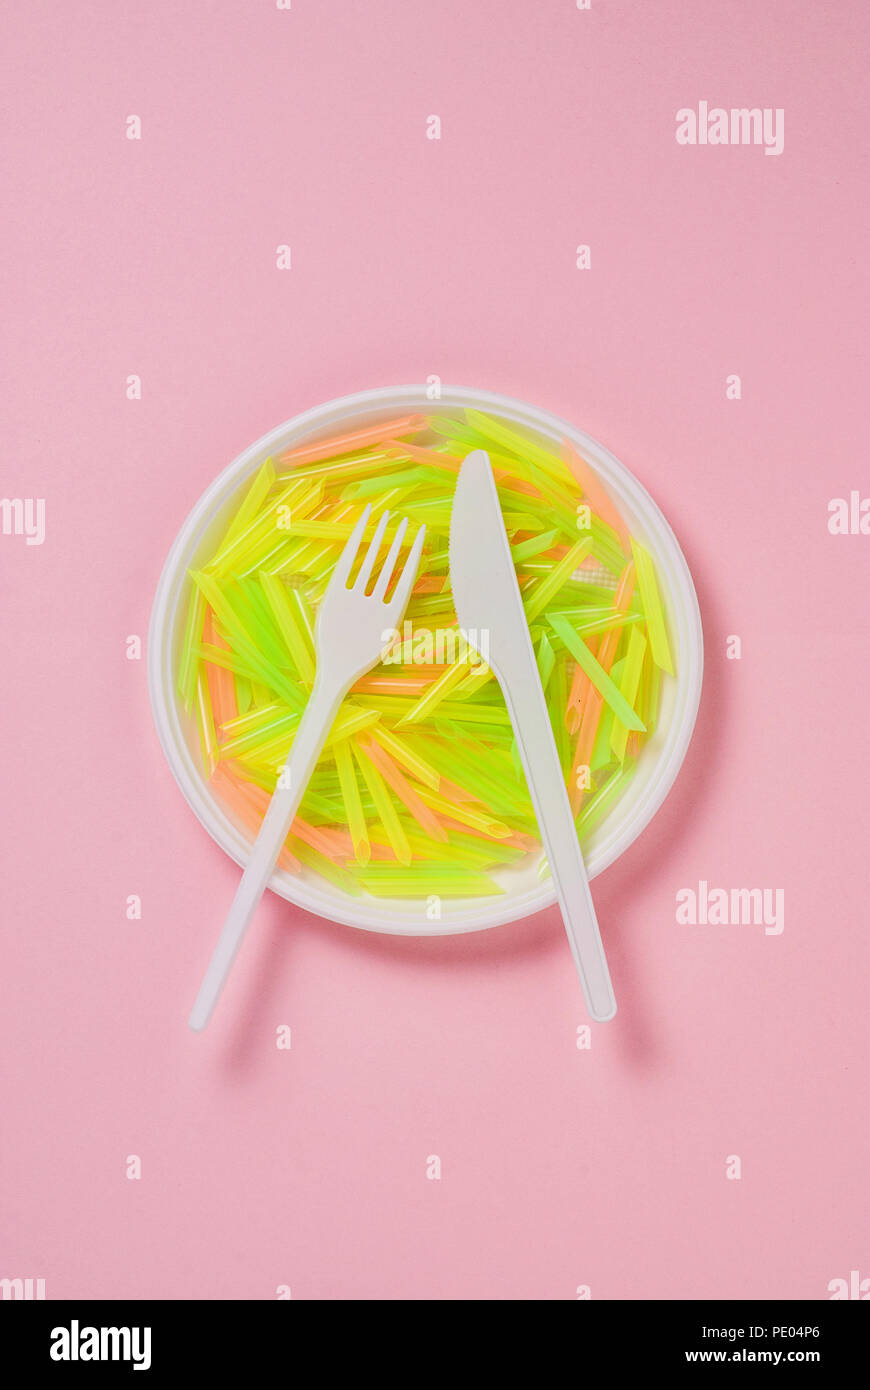 Plate, knife and fork of plastic on a pink background Stock Photo